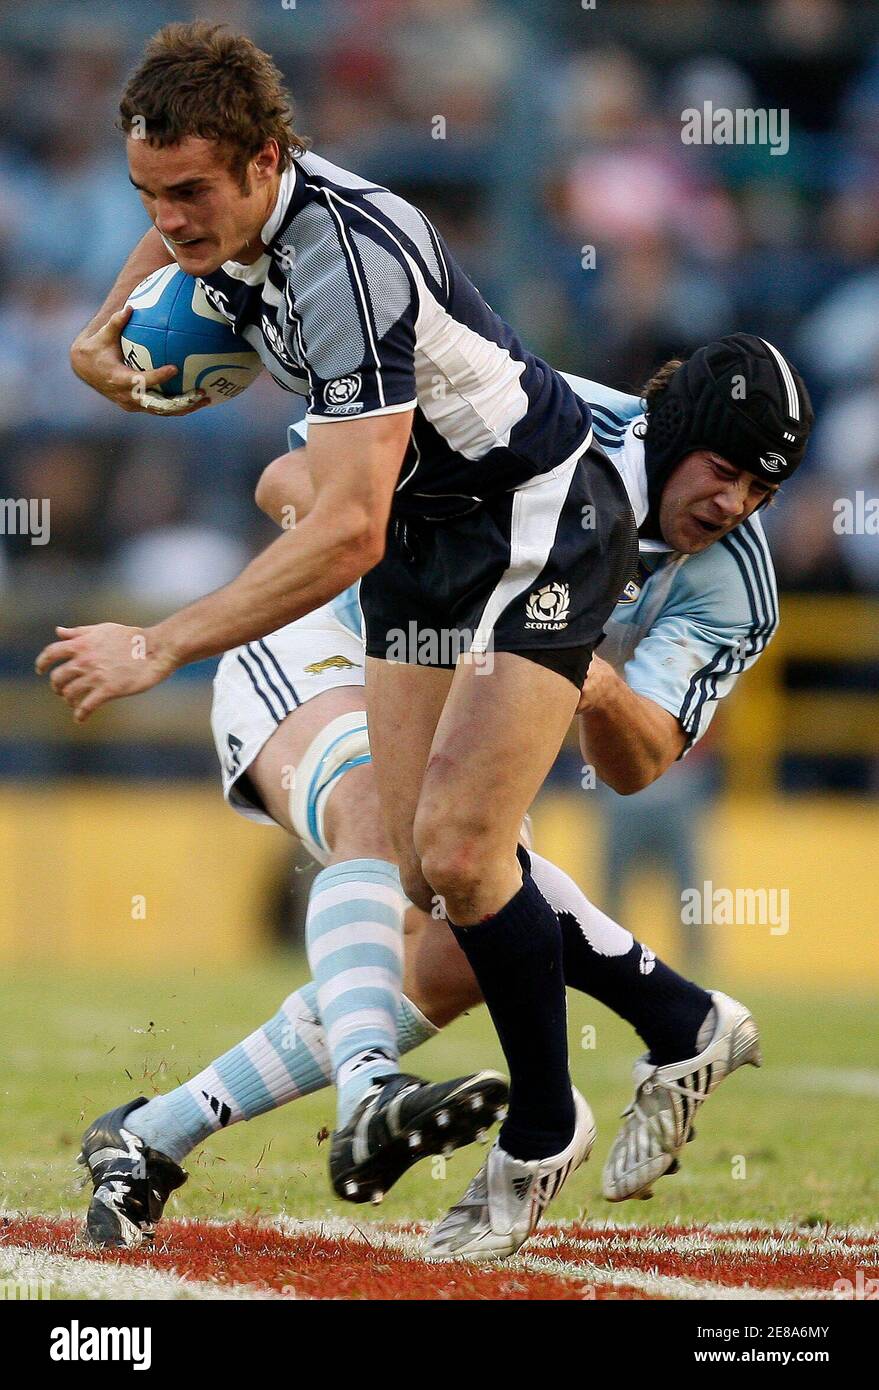 Esteban Lozada (R) of Argentina's Los Pumas tackles Scotland's Dan Parks  during their rugby union test